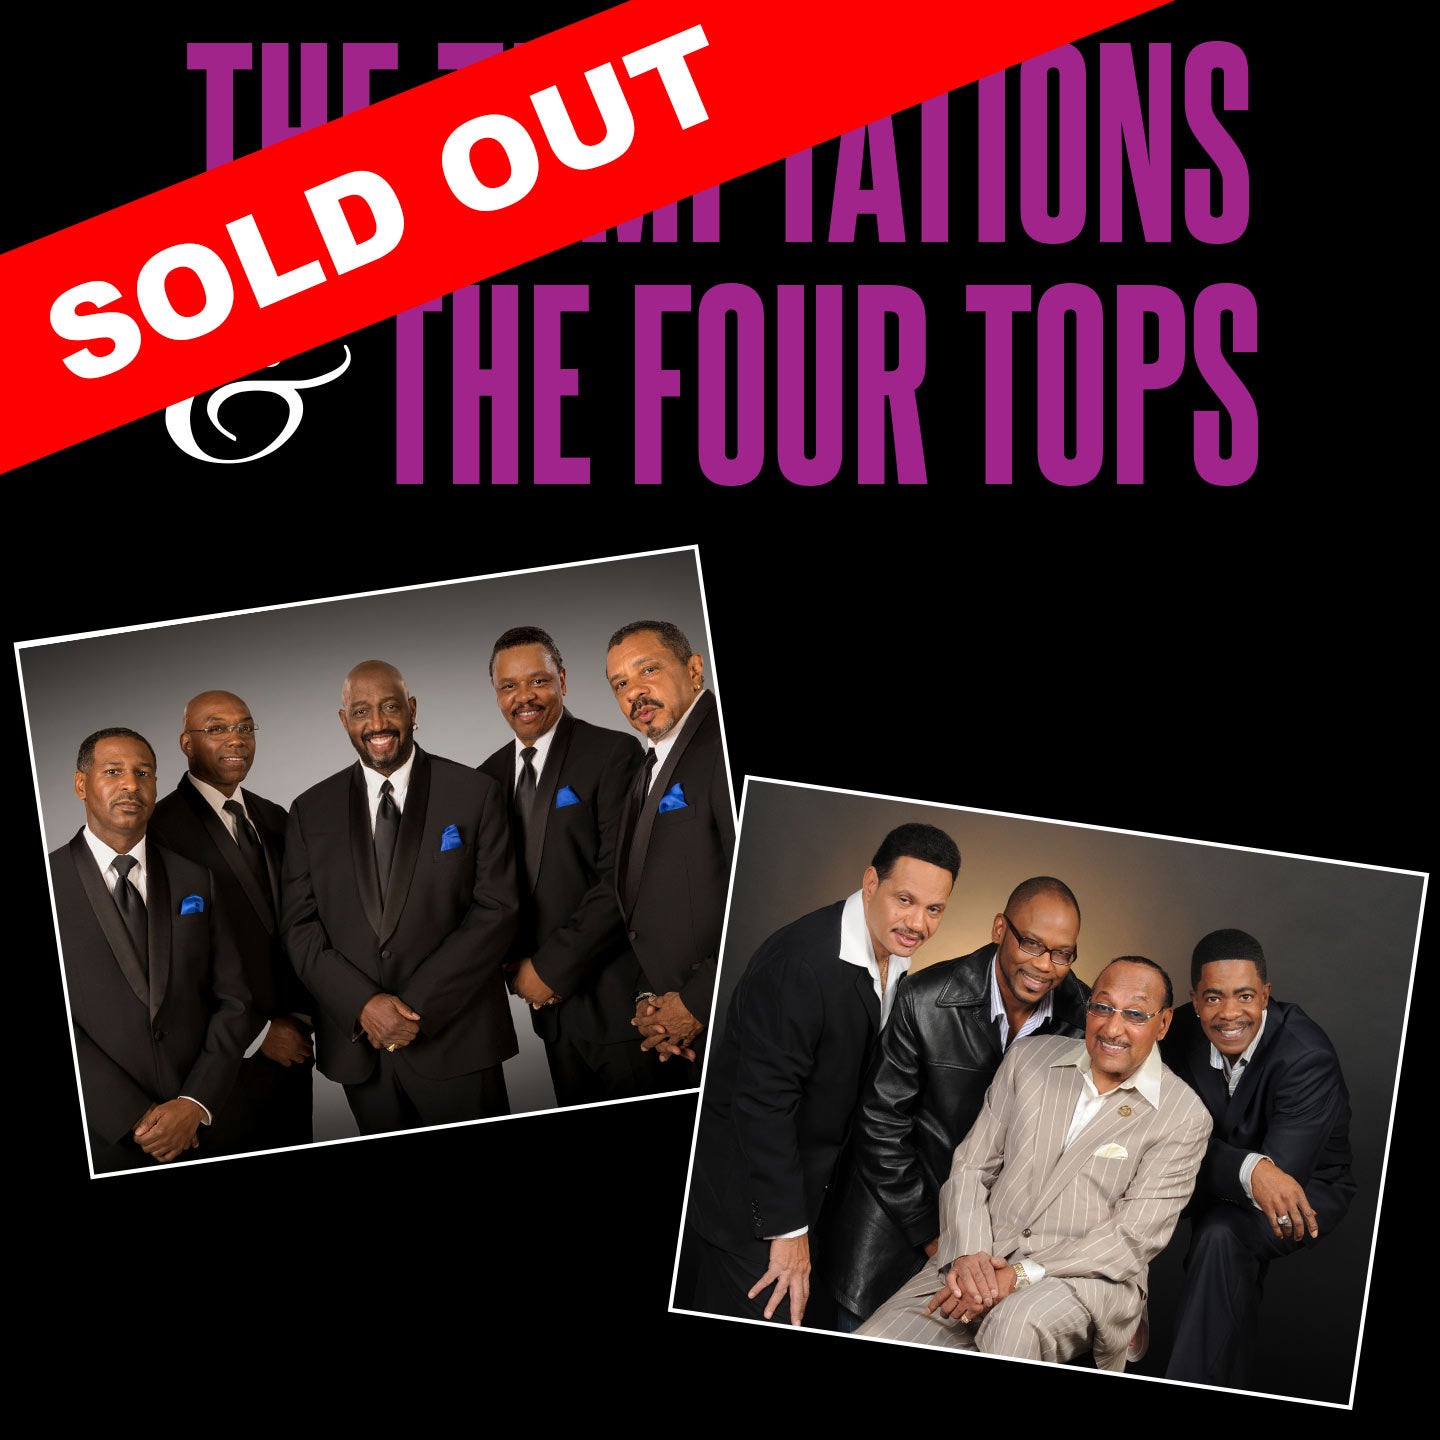 The Temptations & The Four Tops